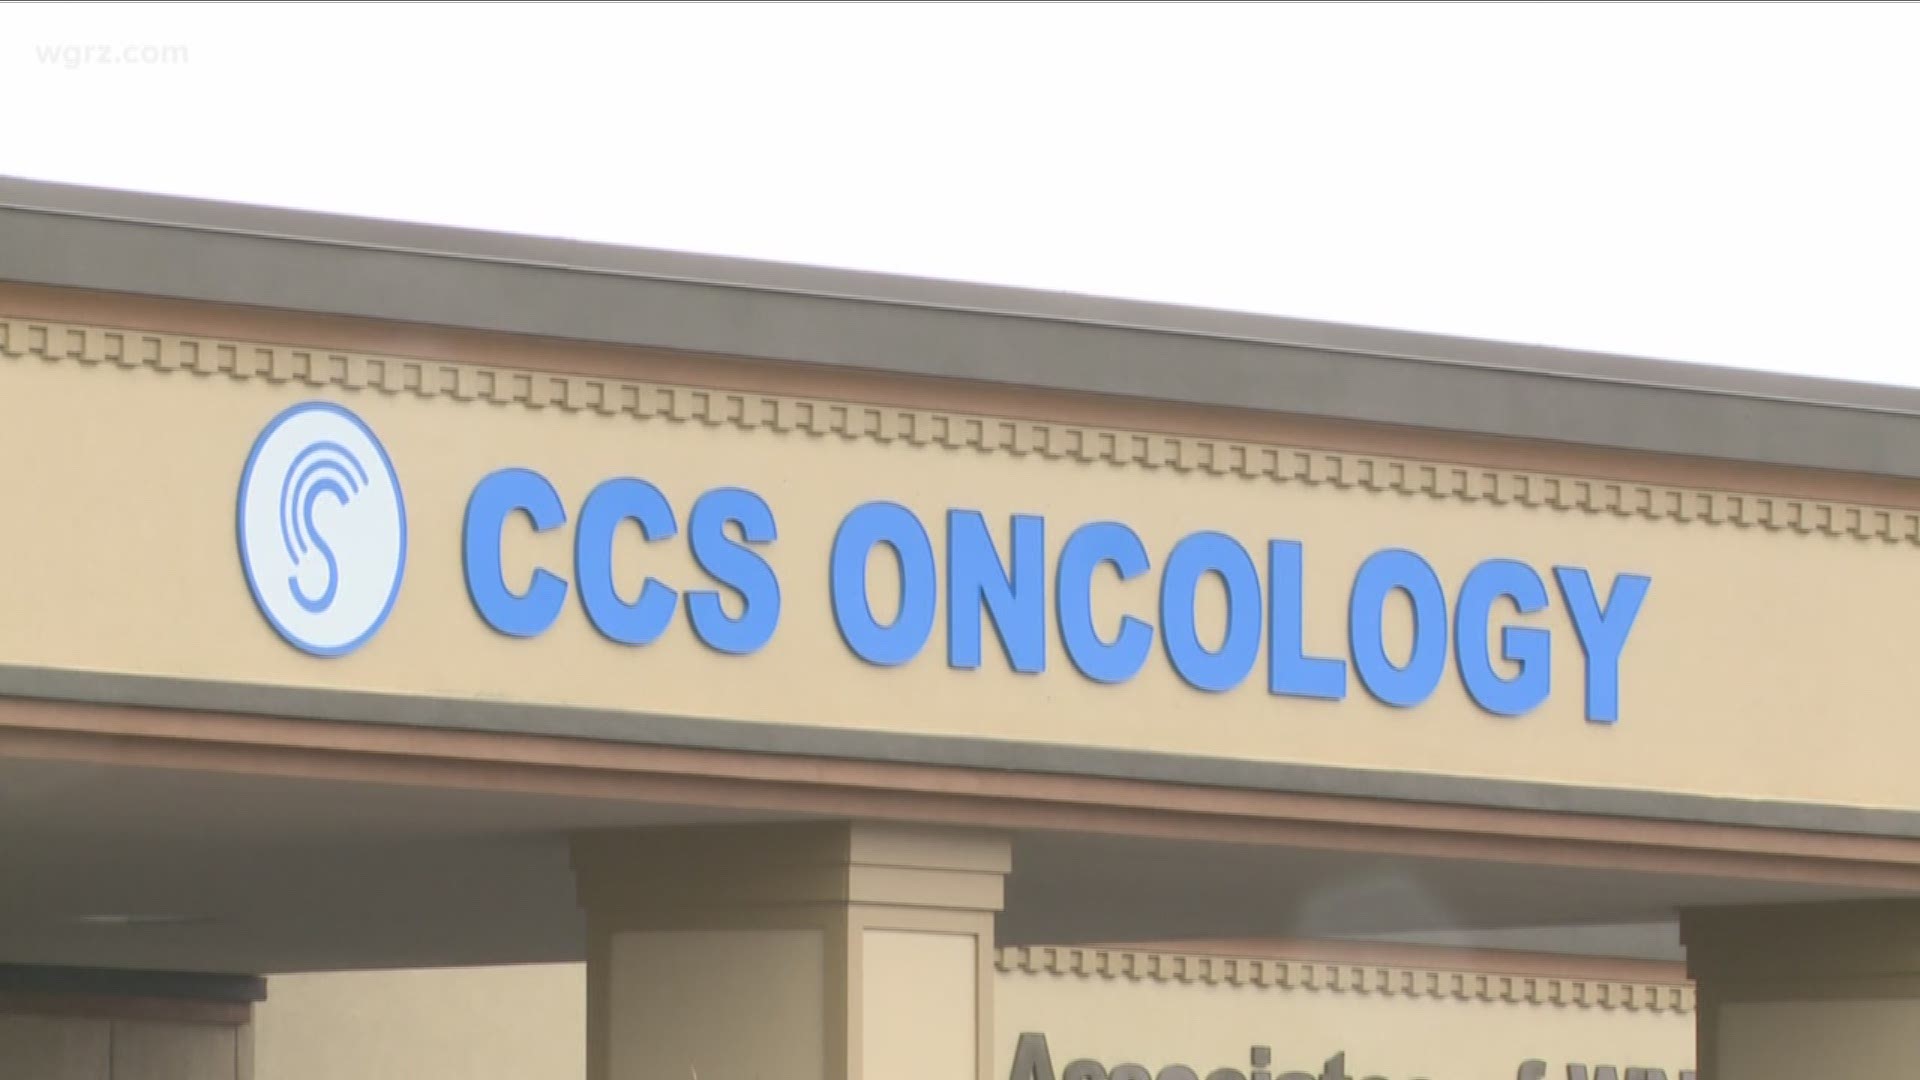 Forum for former CCS oncology patients Monday